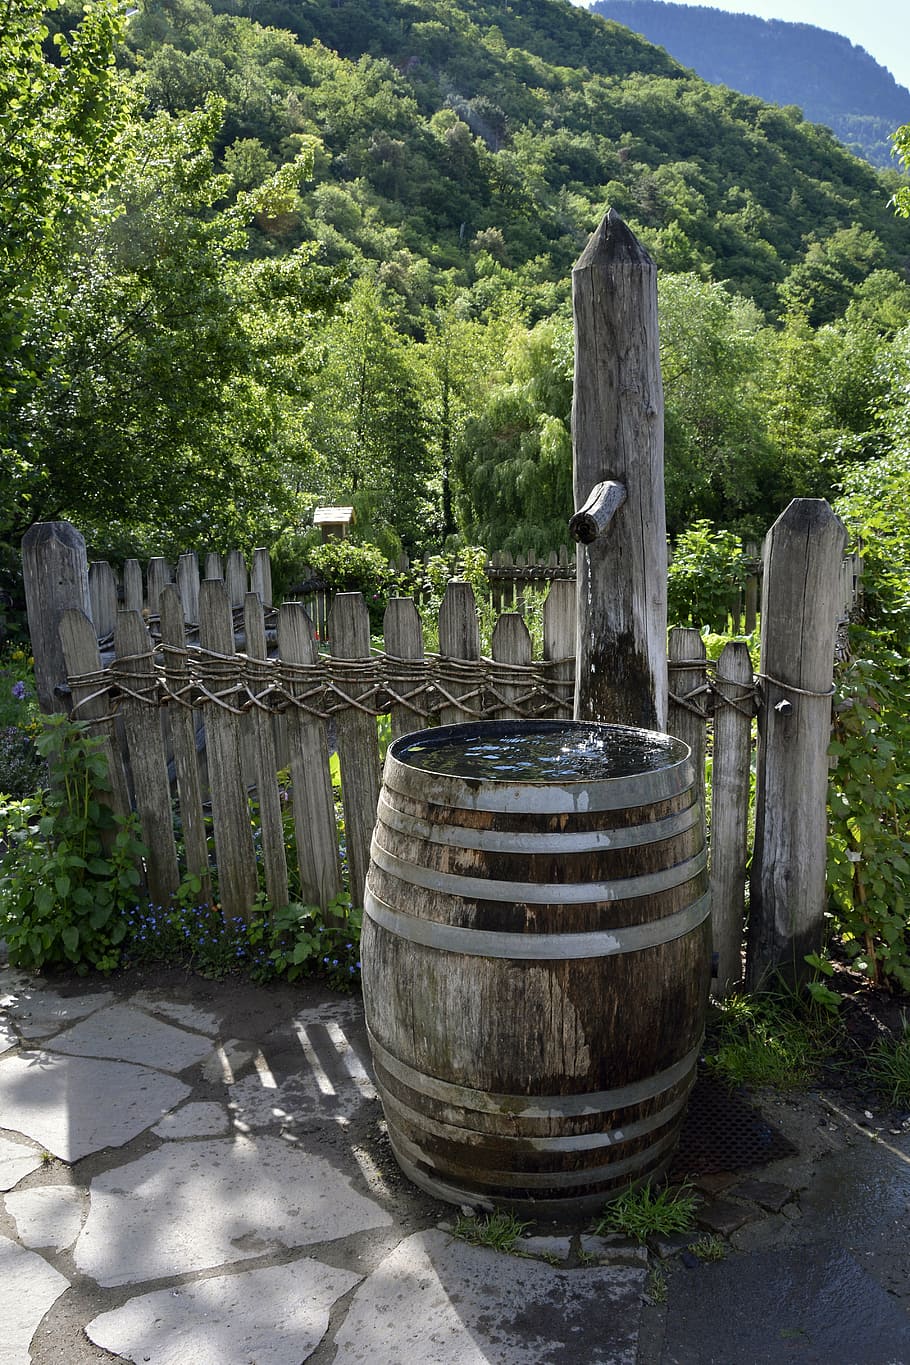 fountain, wooden barrels, garden, water tank, decoration, container, water, deco, wood, plant